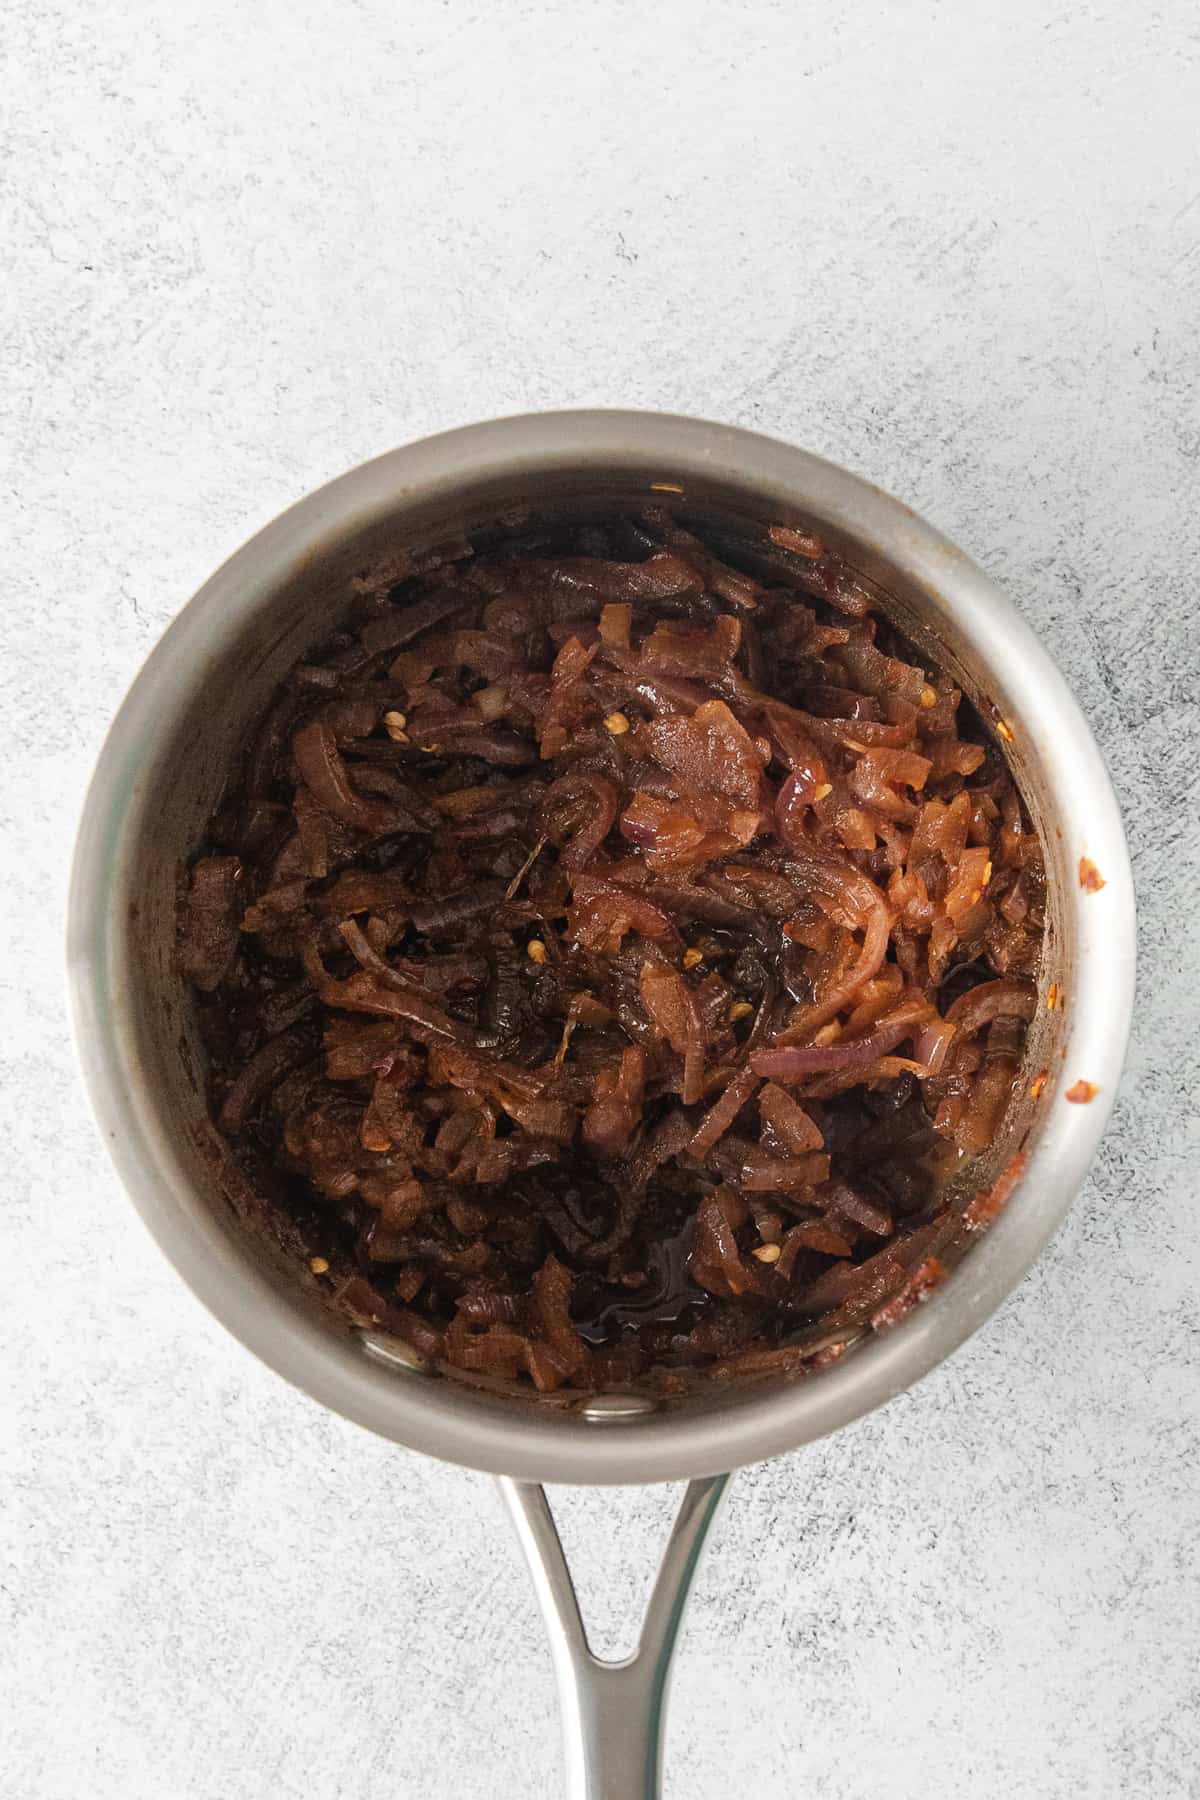 Caramelized onions in a pot.